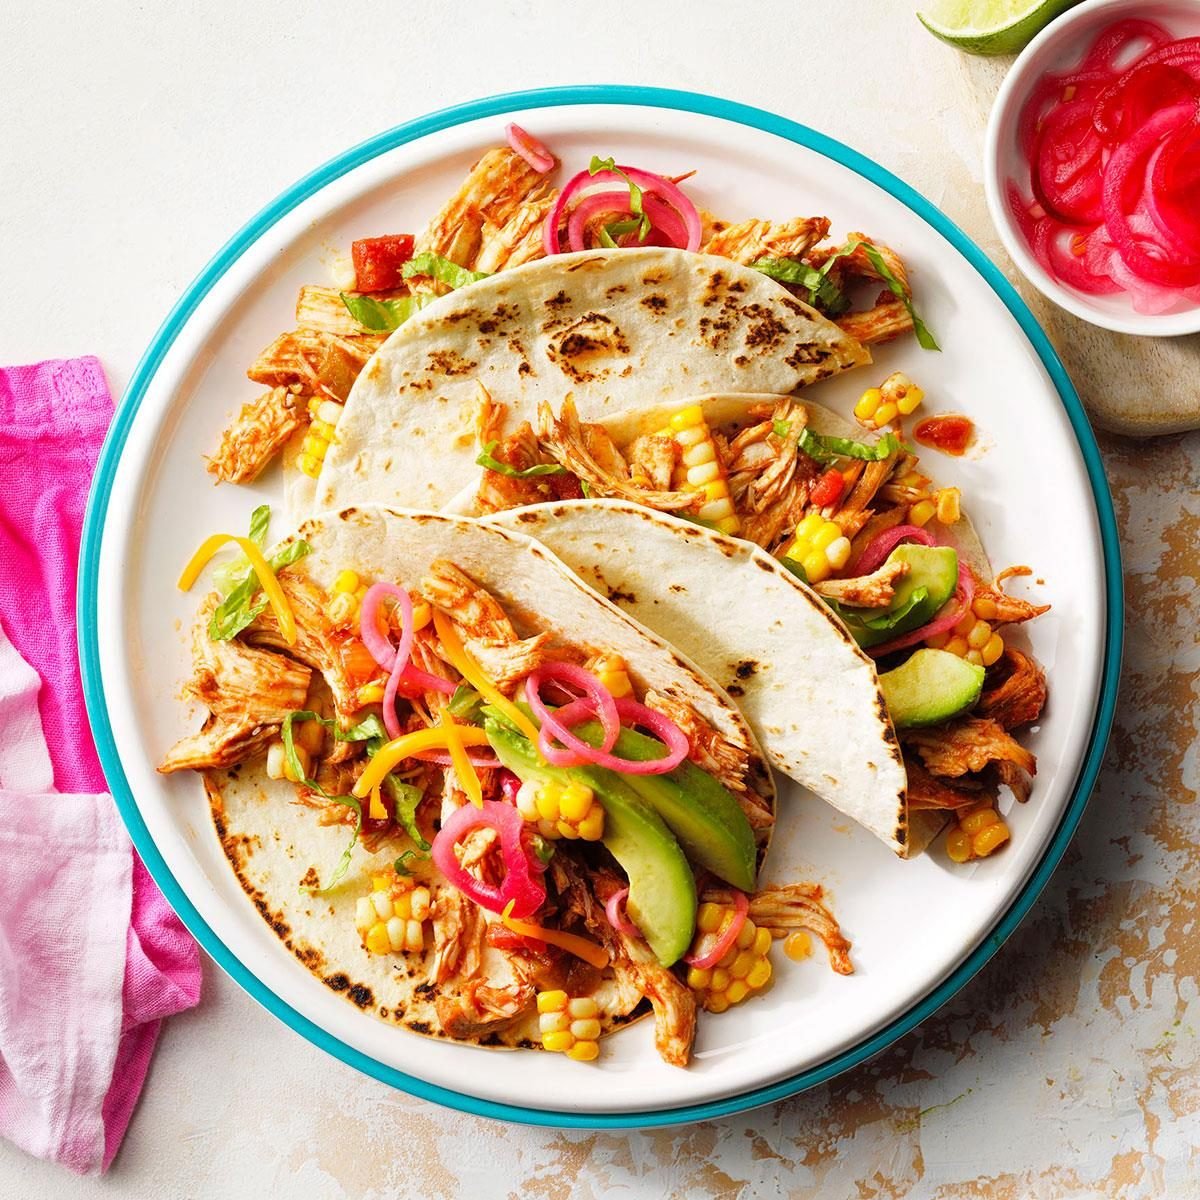 Slow-Cooker Chicken Tacos Recipe: How to Make It